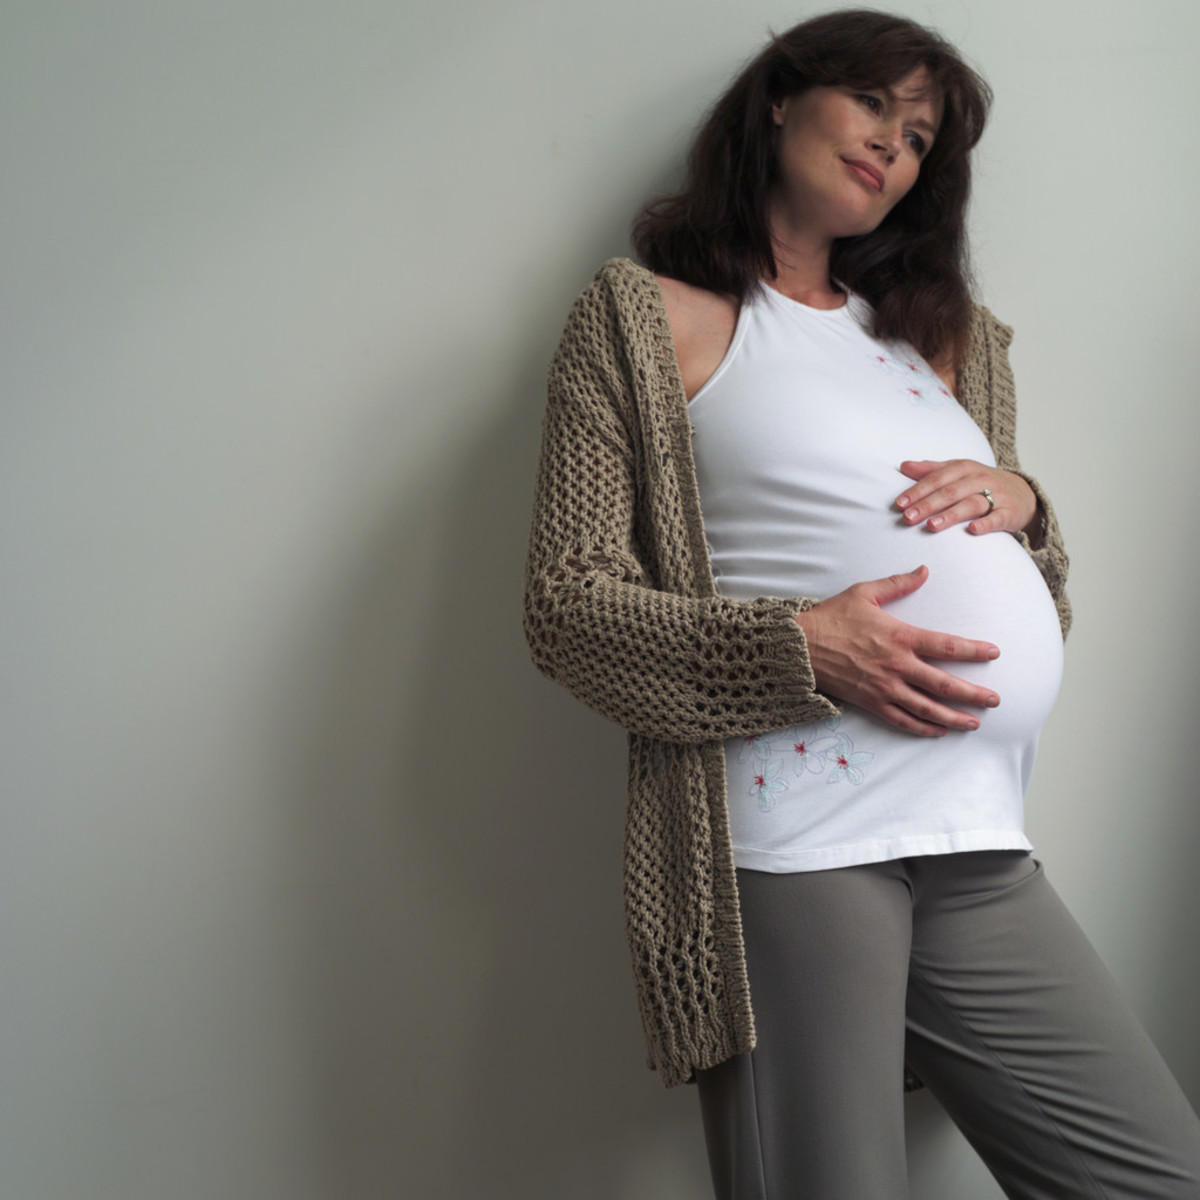 Backache can be a common problem in pregnancy